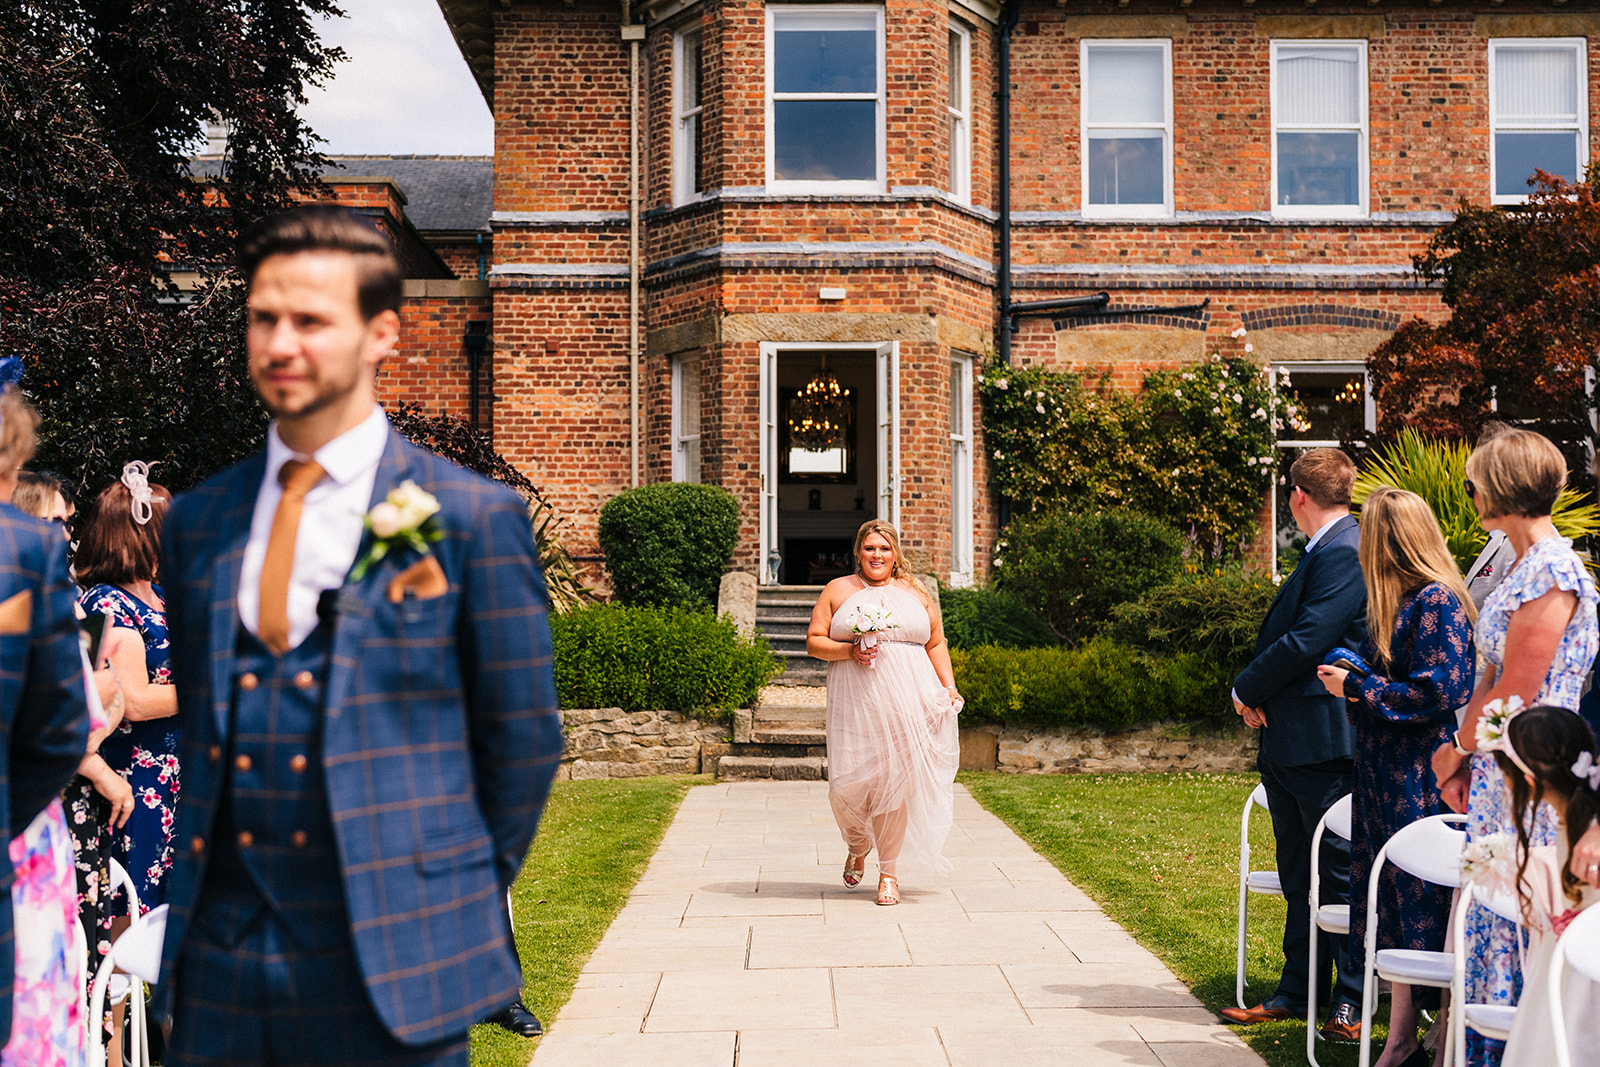 Shottle Hall Wedding Photography - a bridesmaid walking down the aisle during an outdoor wedding ceremony